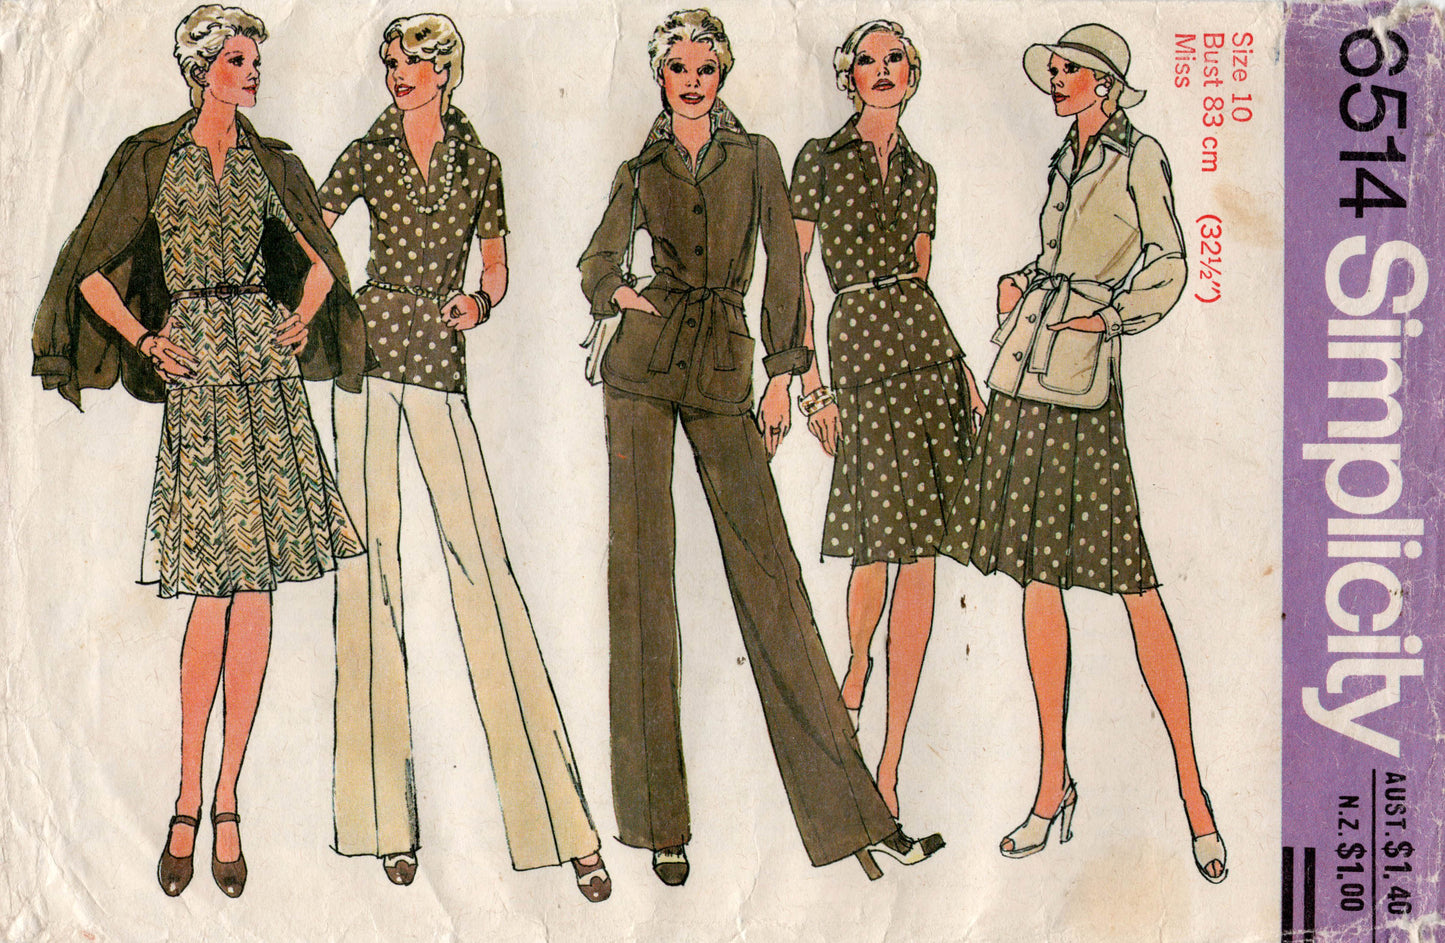 Simplicity 6514 Womens Safari Style Separates 1970s Vintage Sewing Pattern Size 10 Bust 32.5 inches